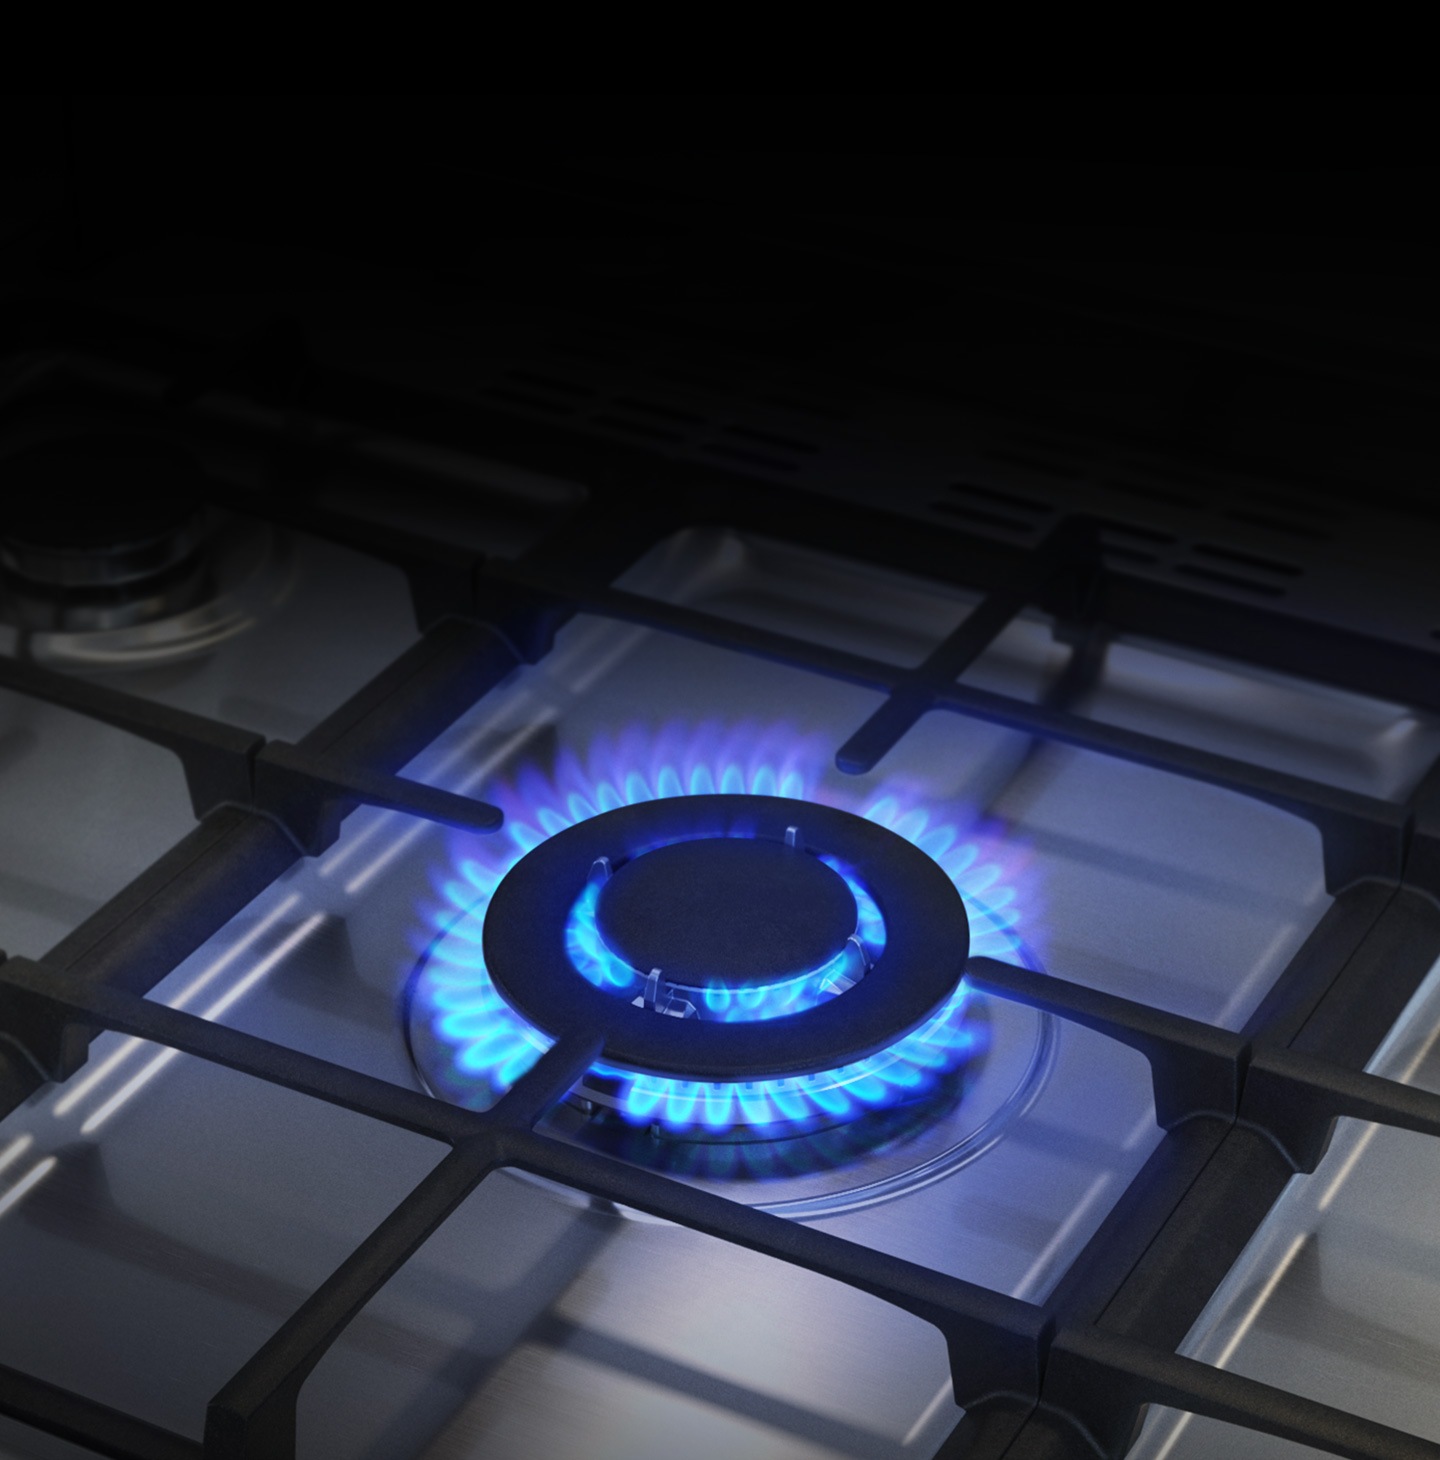 A close-up of the Triple Power Burner shows its three concentric rings of flame.